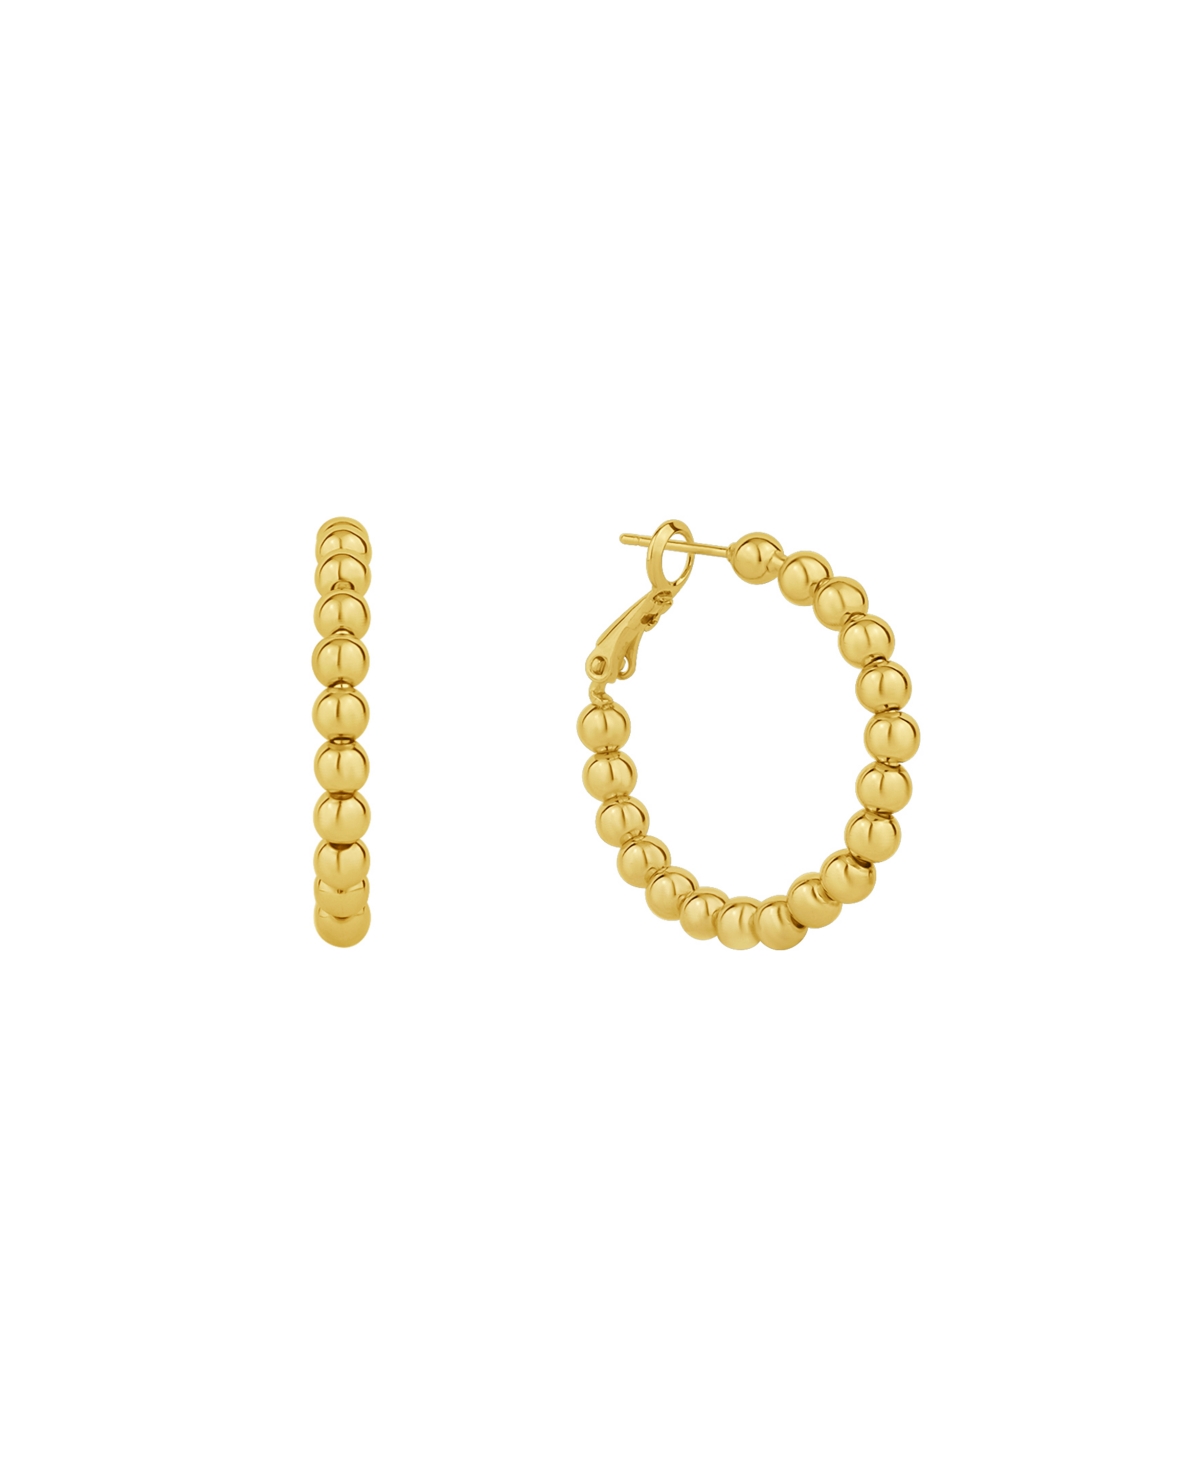 18K Gold Plated or Silver Plated Bead Hoop Earring - Gold Flash